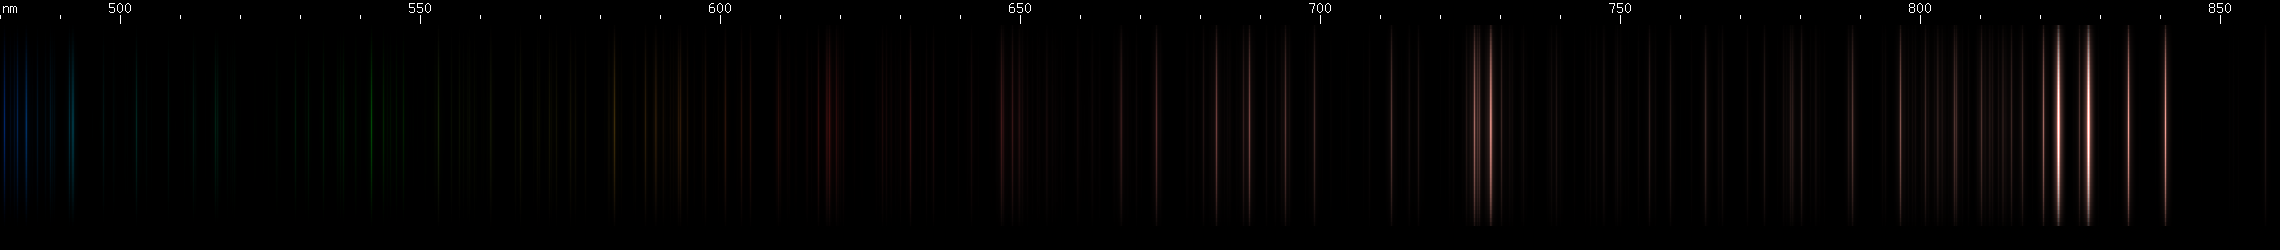 Spectral lines of Xenon.